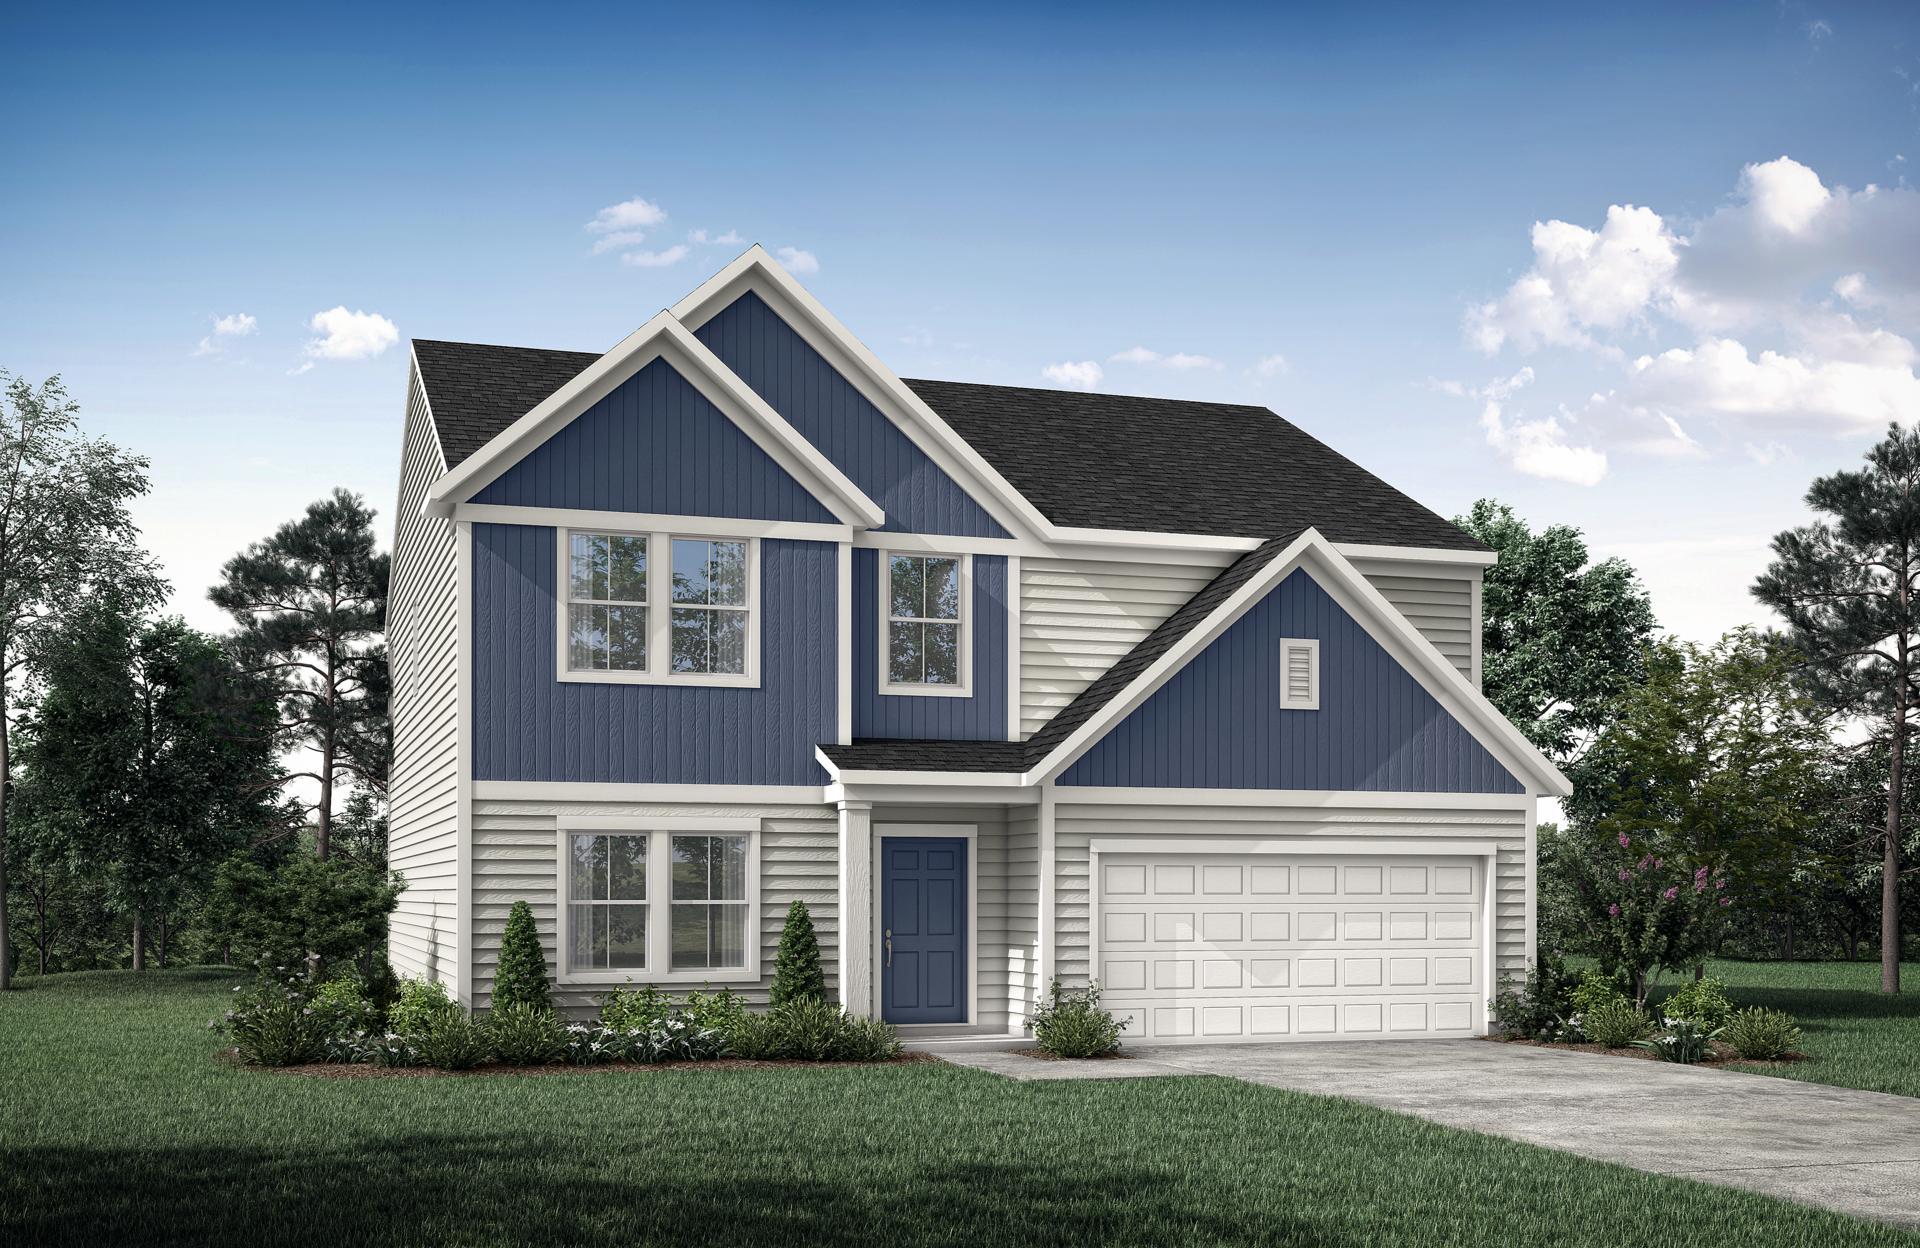 Decoursey In Ington Ky By Drees Homes